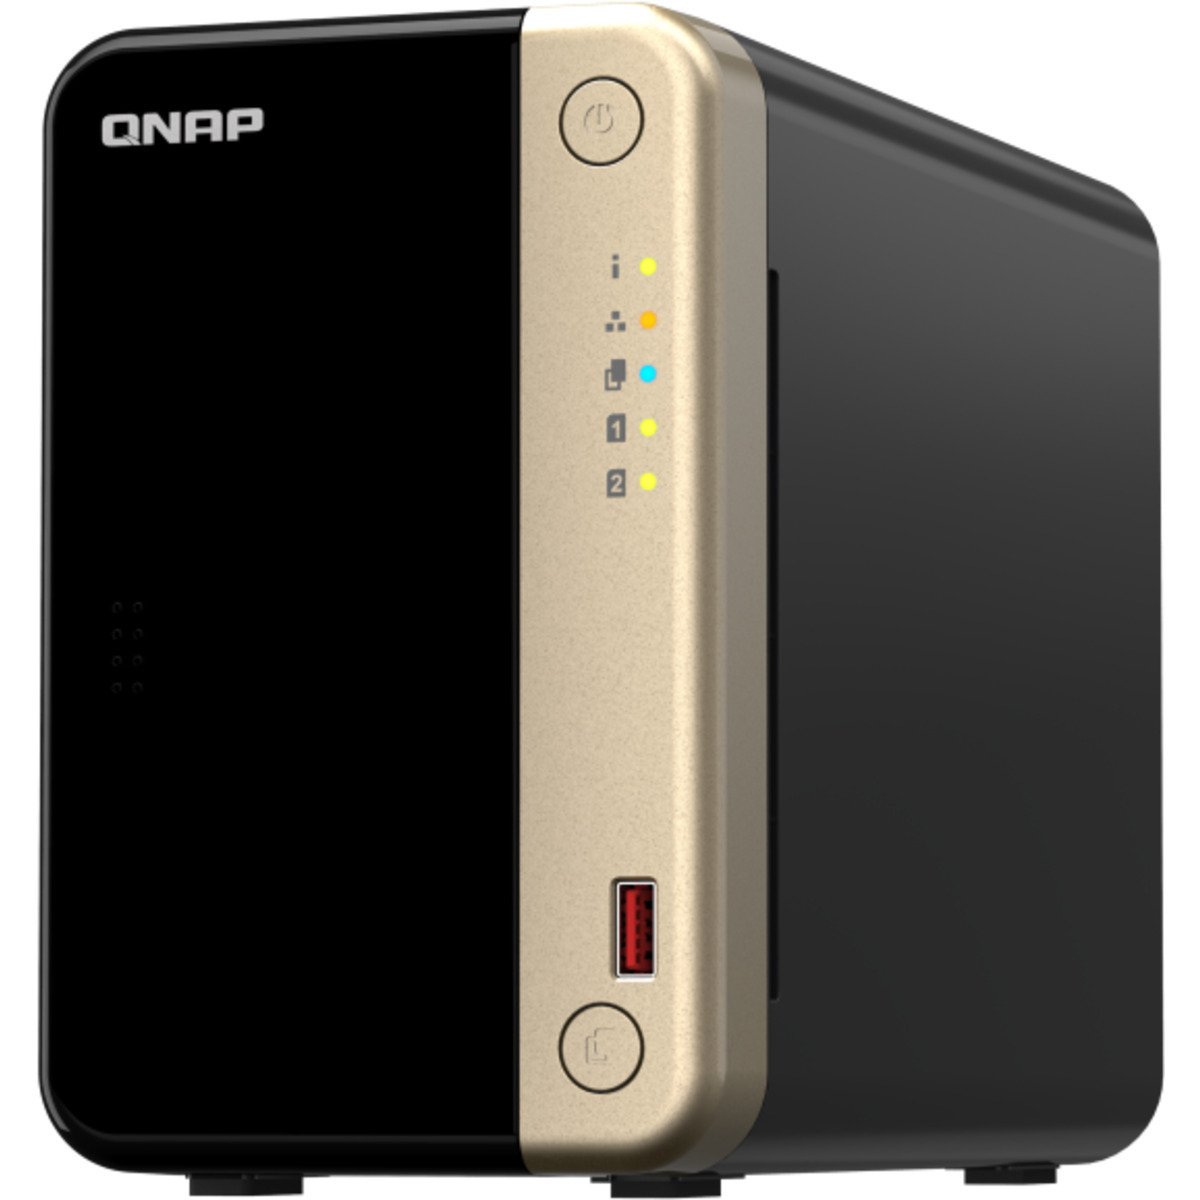 QNAP TS-264 10tb 2-Bay Desktop Multimedia / Power User / Business NAS - Network Attached Storage Device 1x10tb Seagate IronWolf Pro ST10000NT001 3.5 7200rpm SATA 6Gb/s HDD NAS Class Drives Installed - Burn-In Tested - ON SALE TS-264